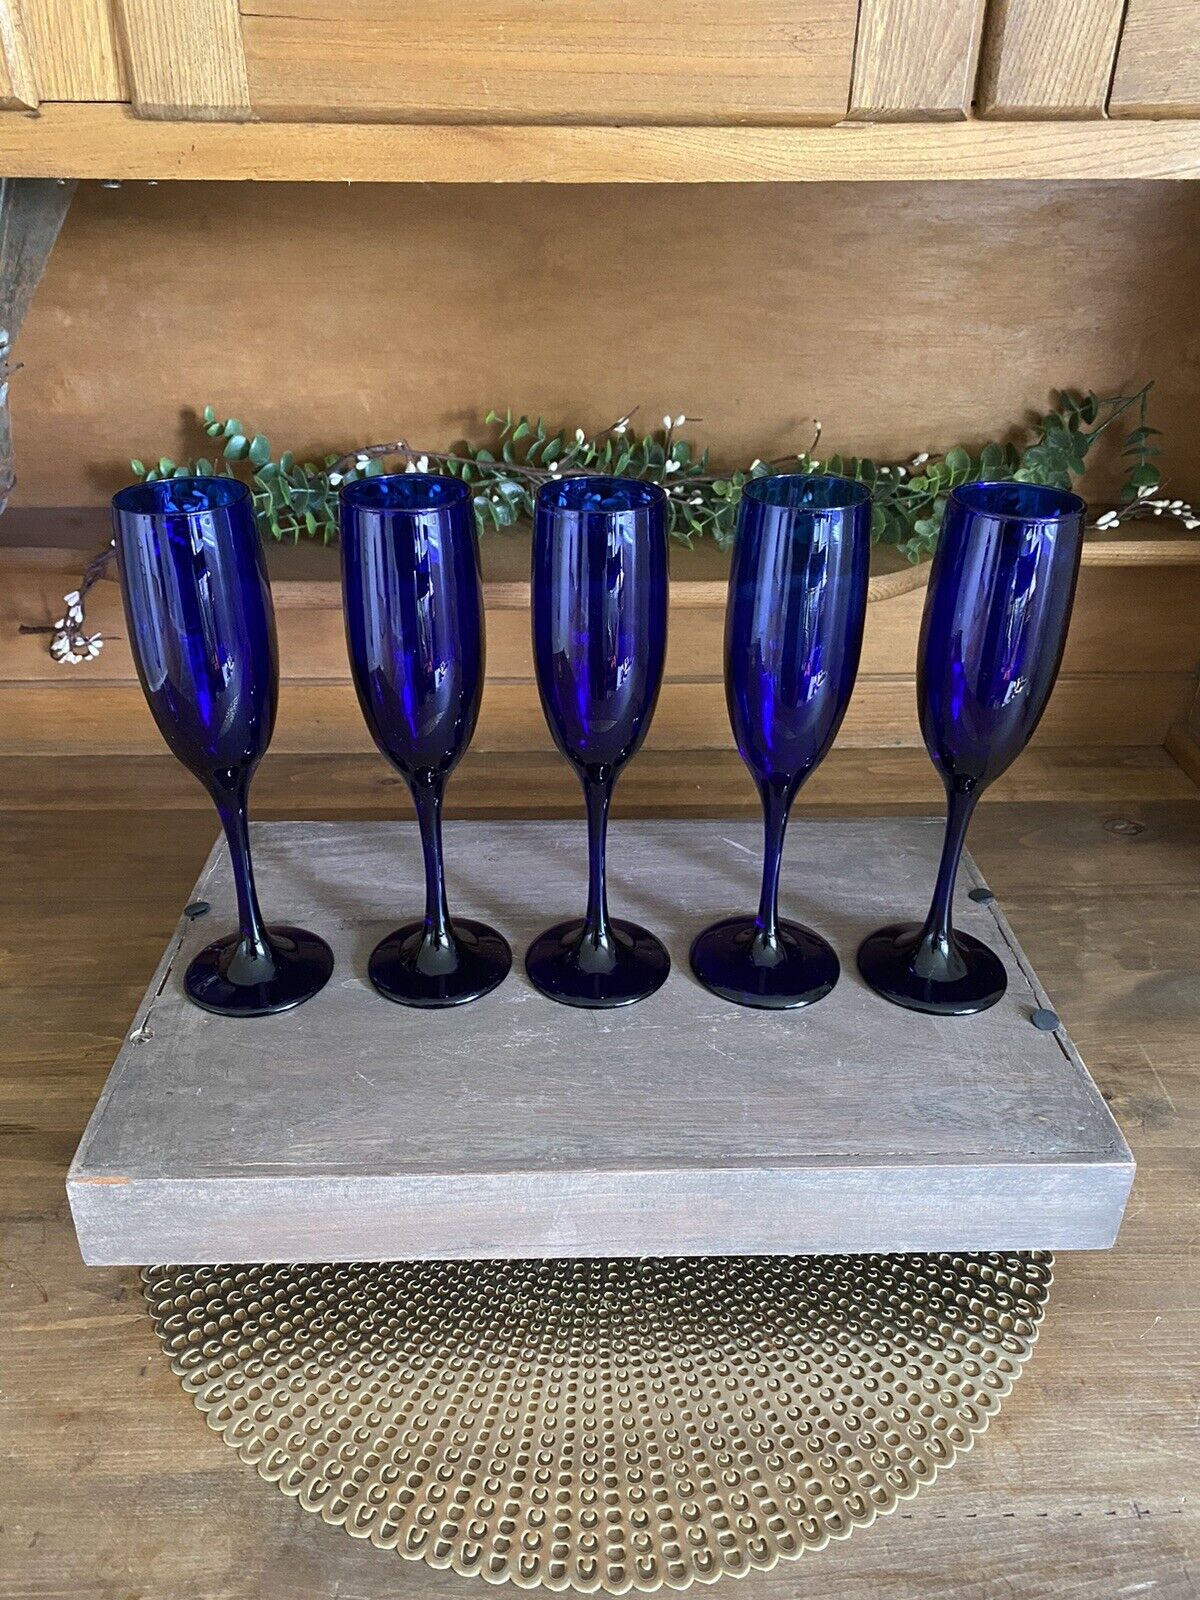 Set of 5 Premiere Cobalt by Libbey Fluted Champagne Glasses Blown Glass 8.75